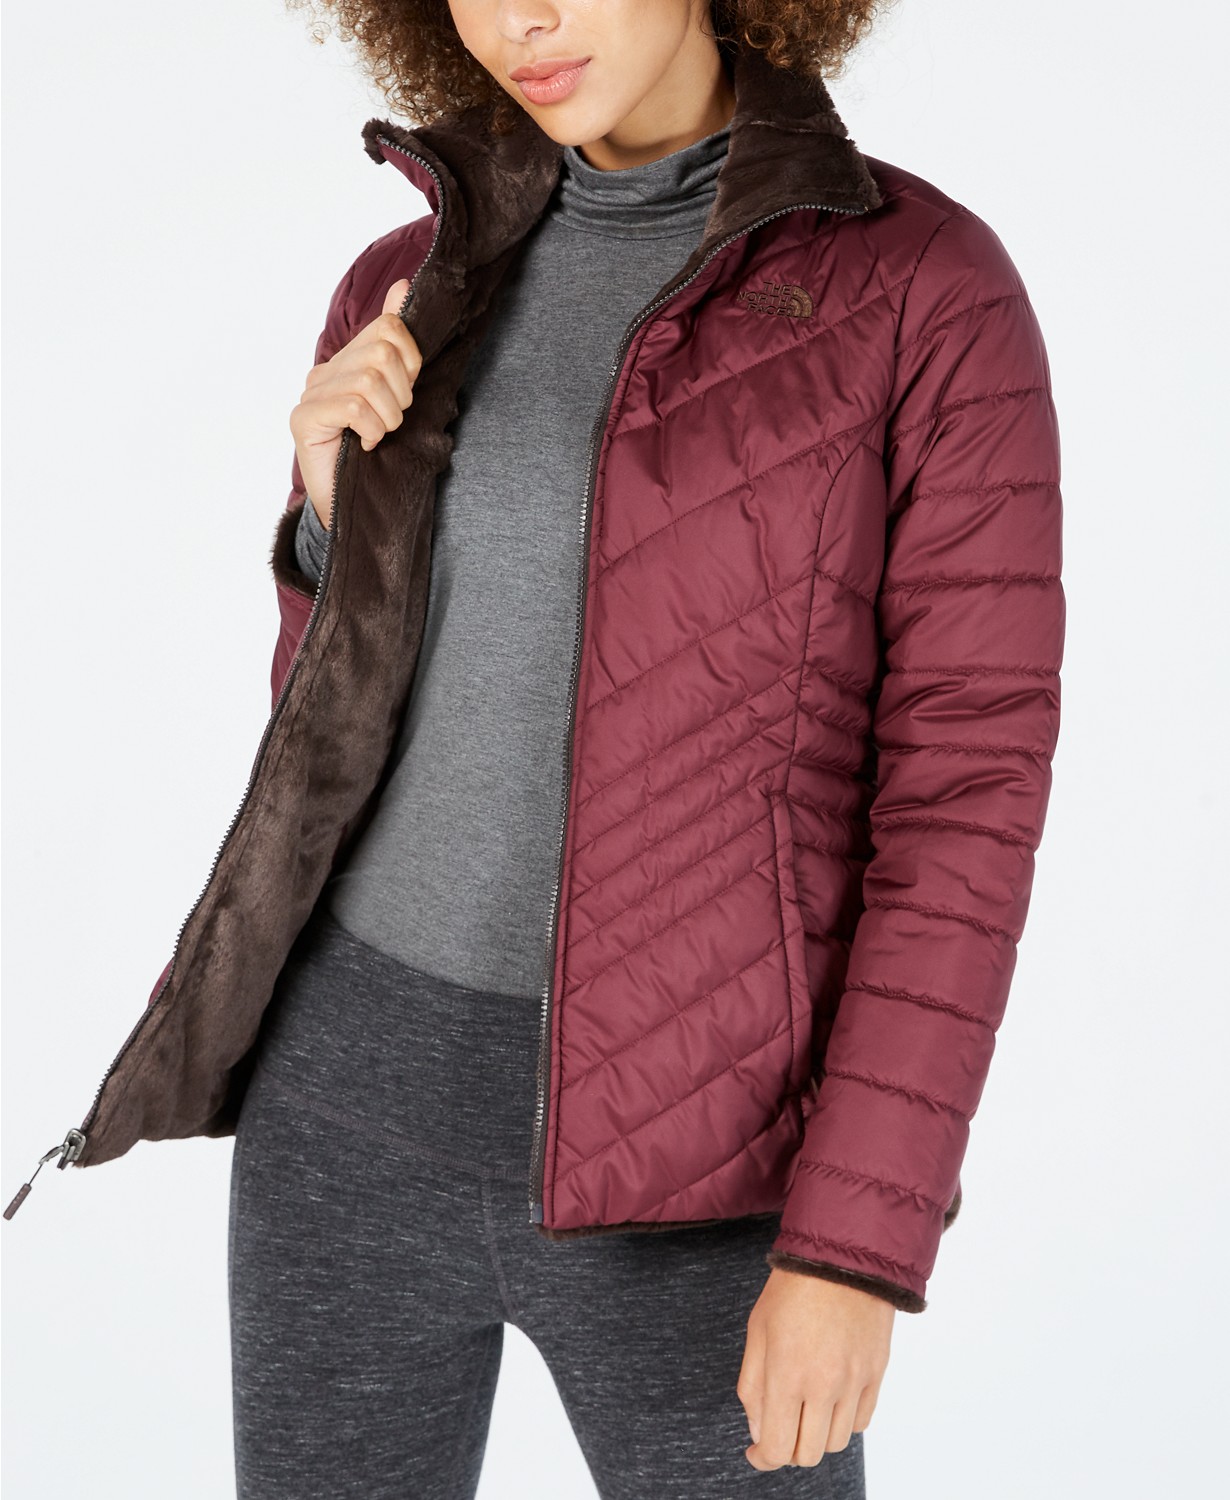 So Many North Face Jackets Are on Sale 